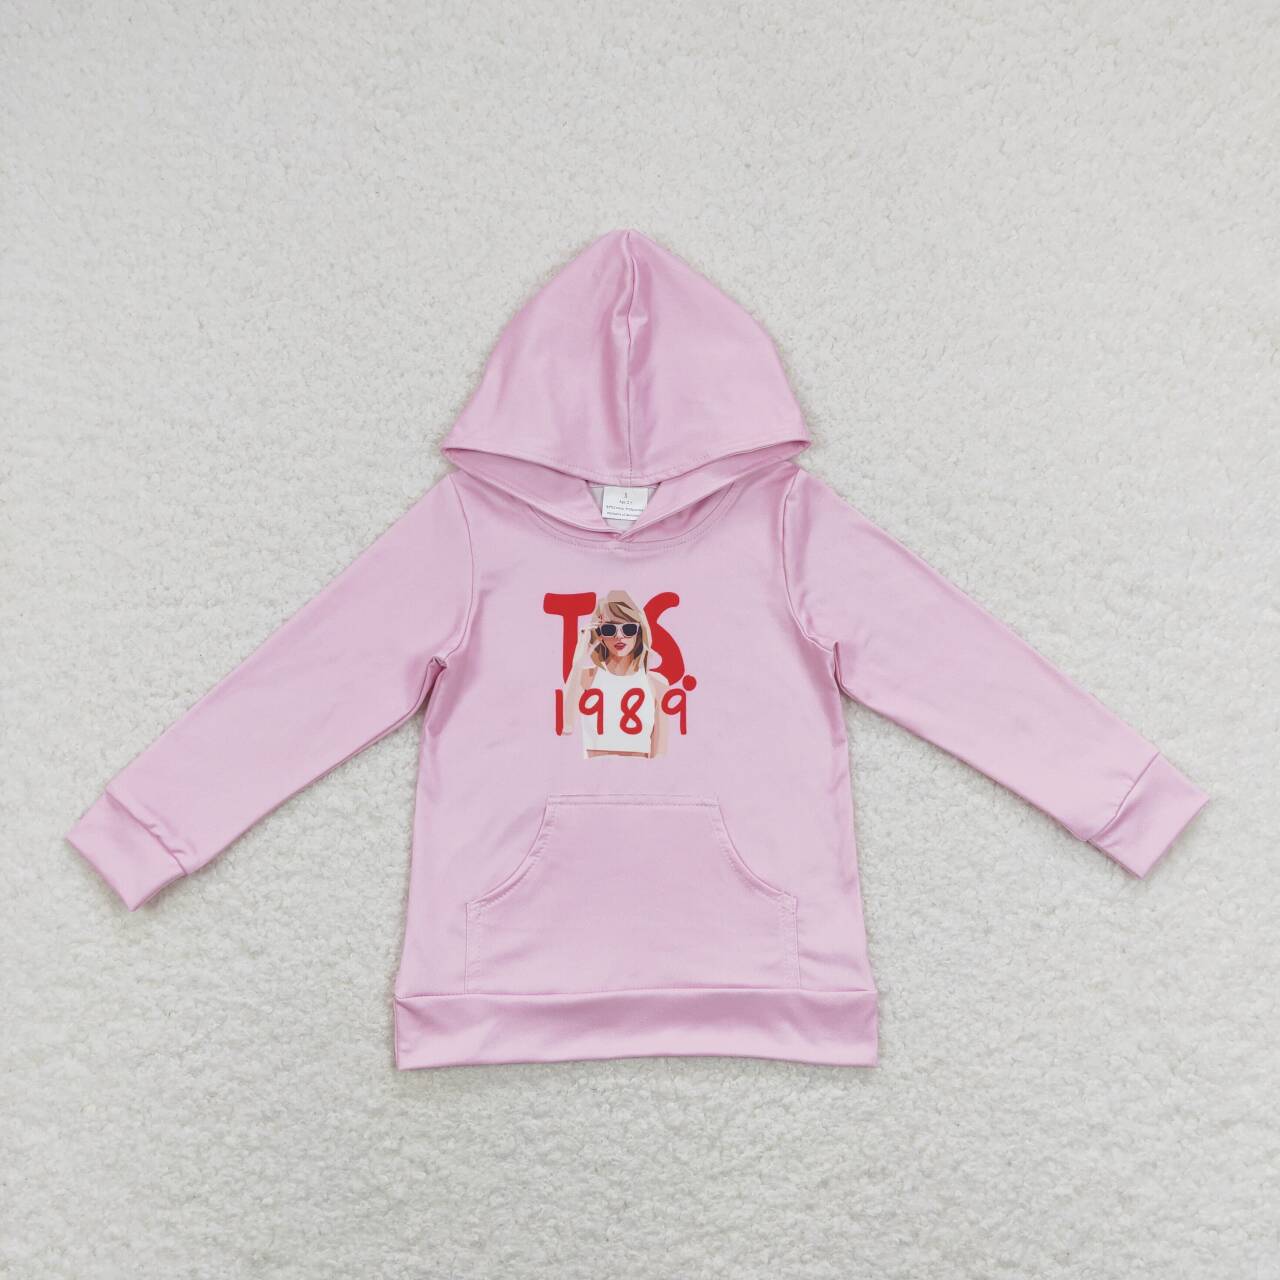 GT0436 taylor swift 1989 pink hooded long-sleeved top